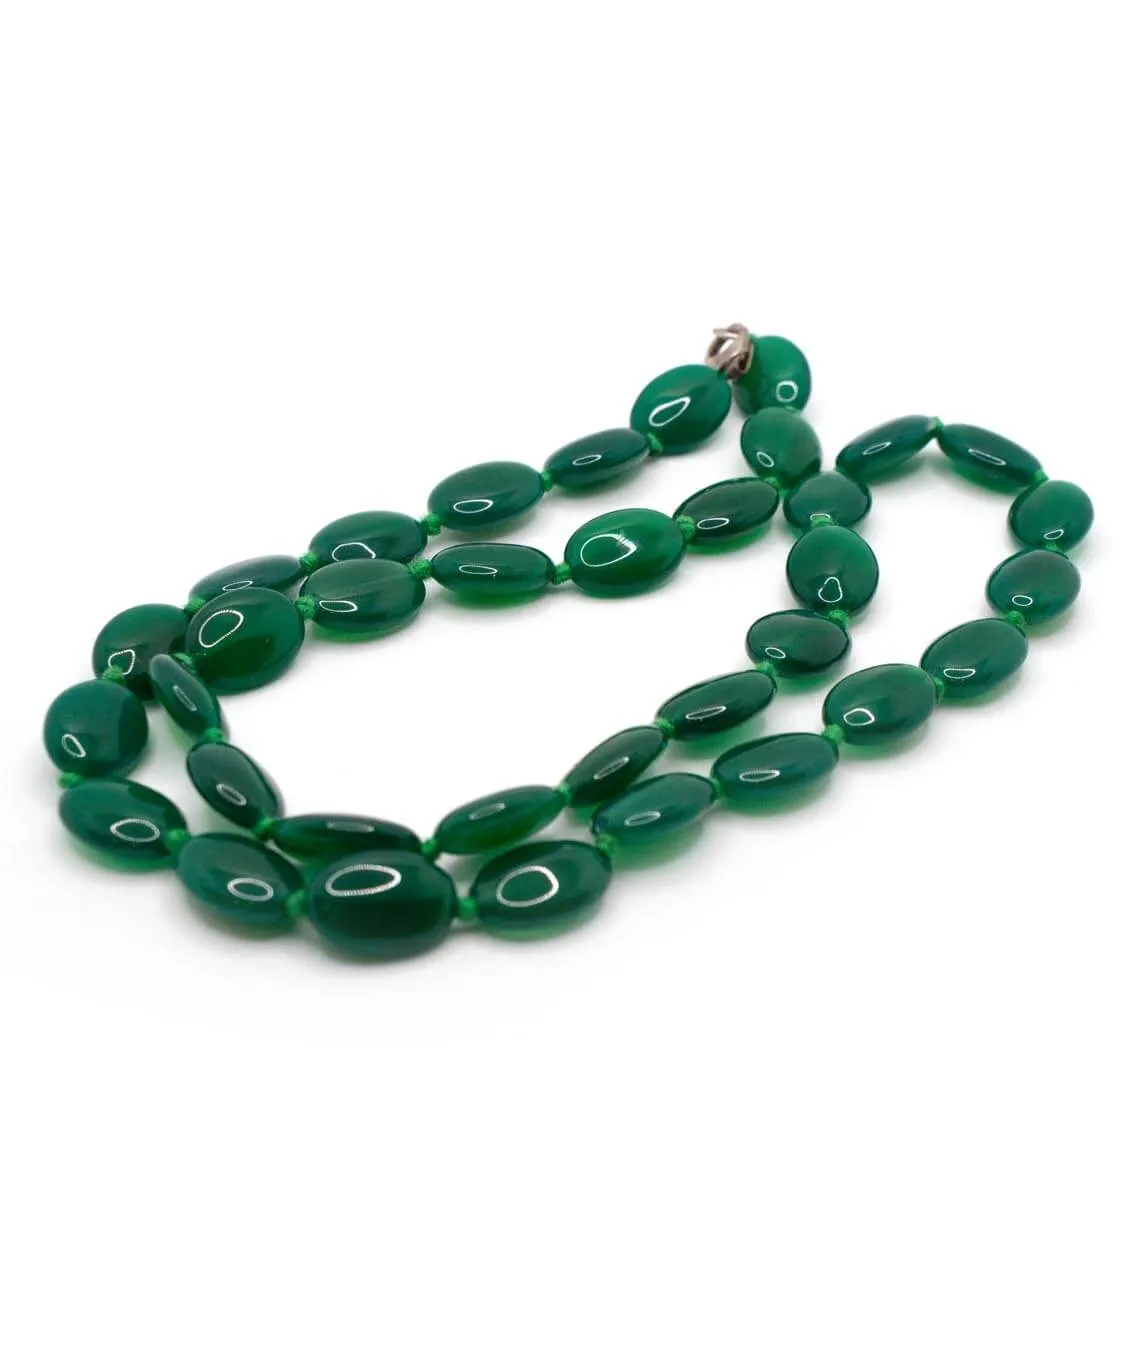 Vintage 1930s green glass string of beads